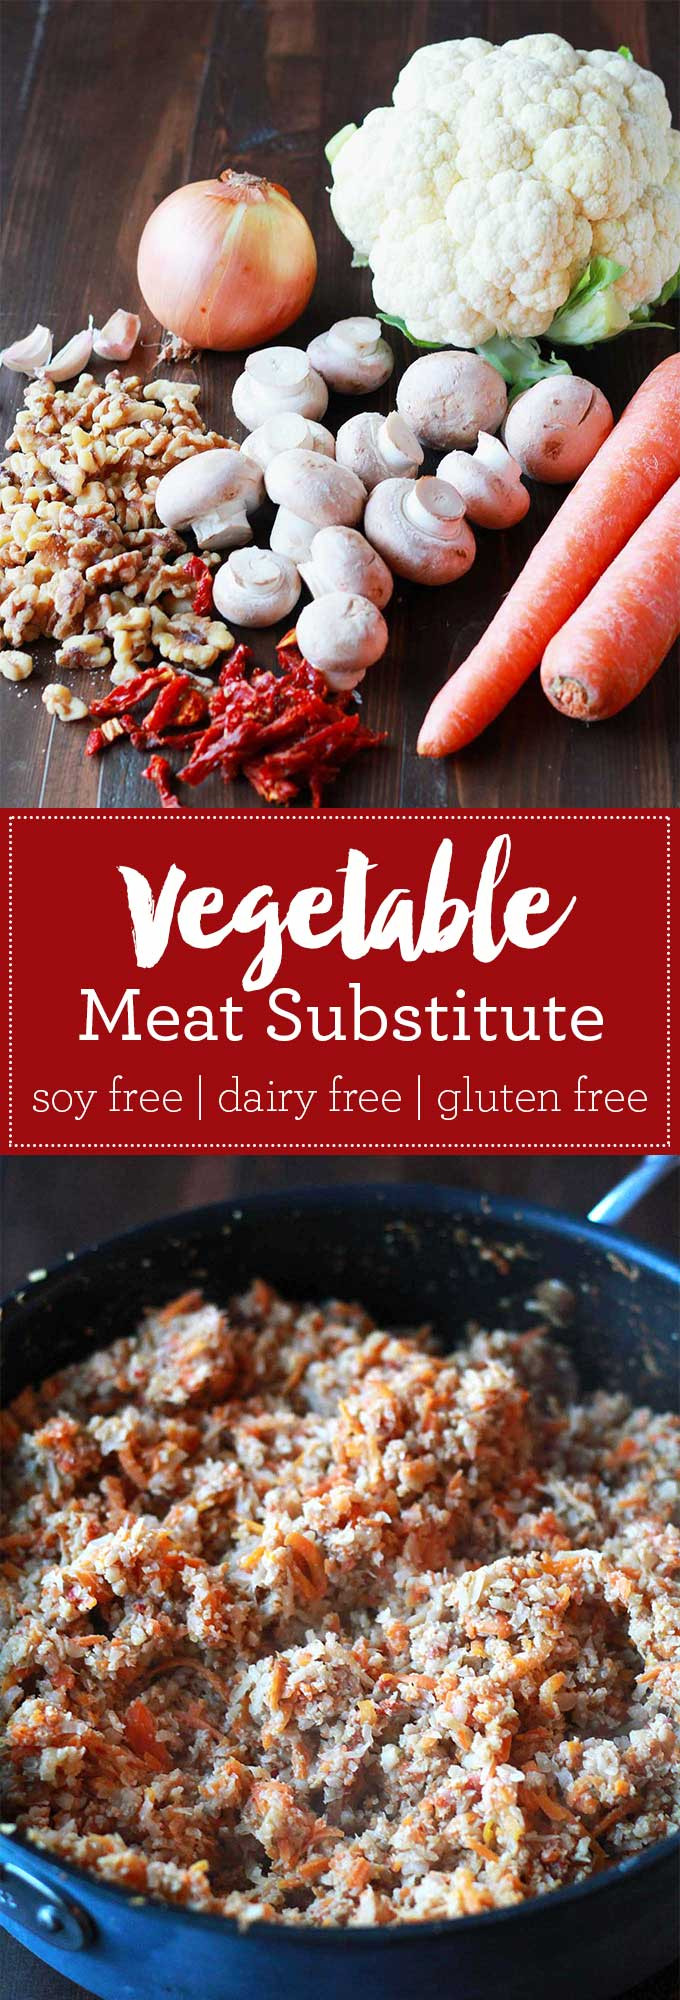 Vegetarian Ground Beef Substitute
 Ve able Meat Substitute